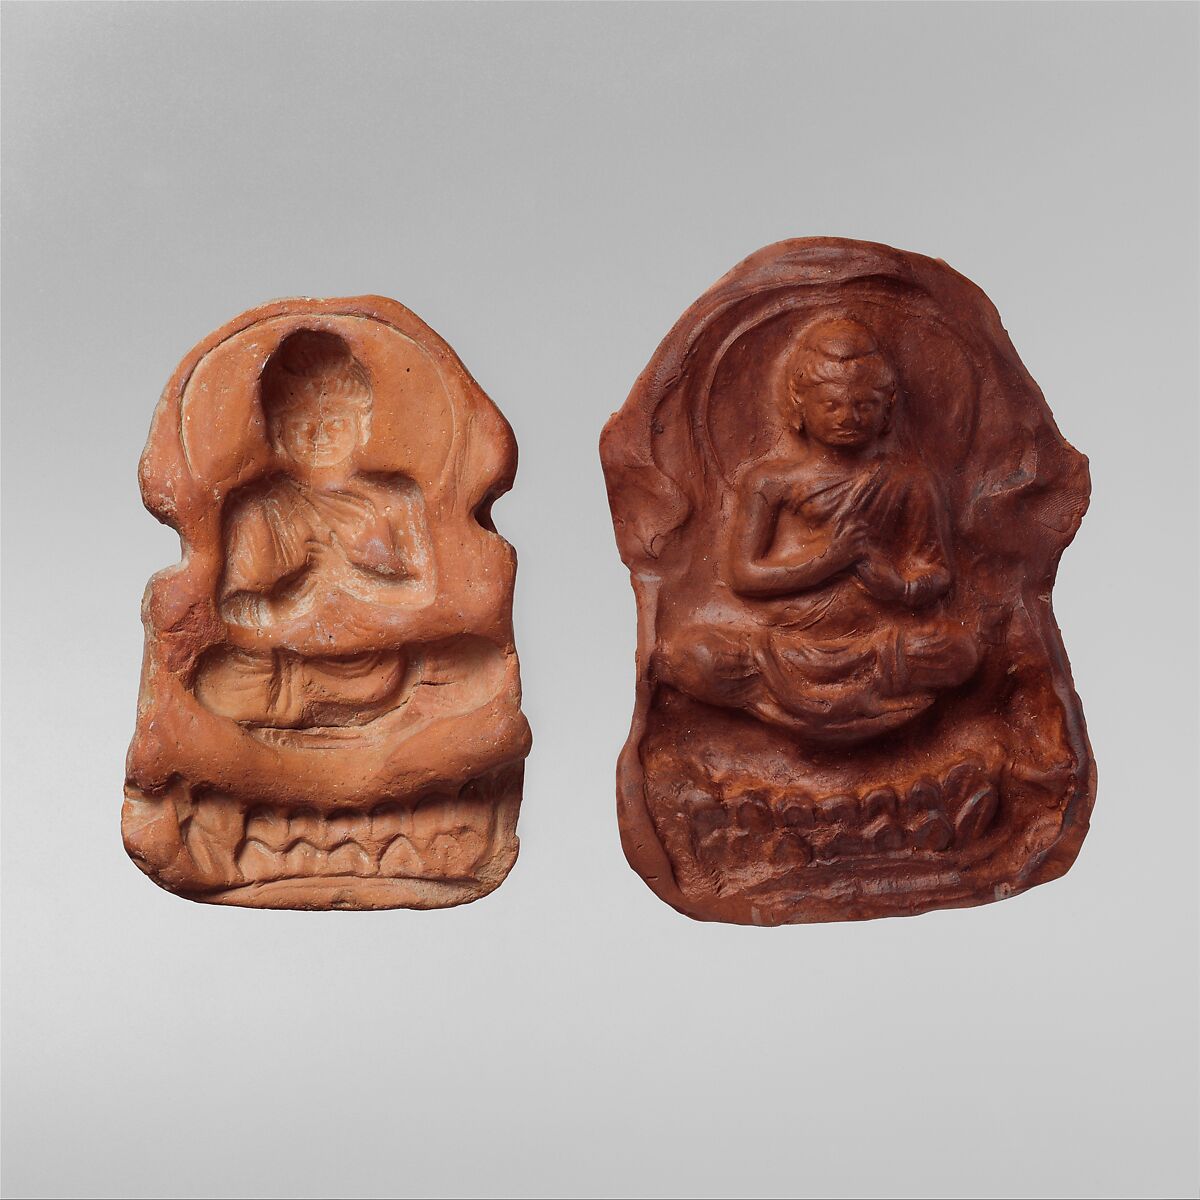 Mold and Impression for a Seated Buddha, Terracotta, Pakistan (ancient region of Gandhara) 